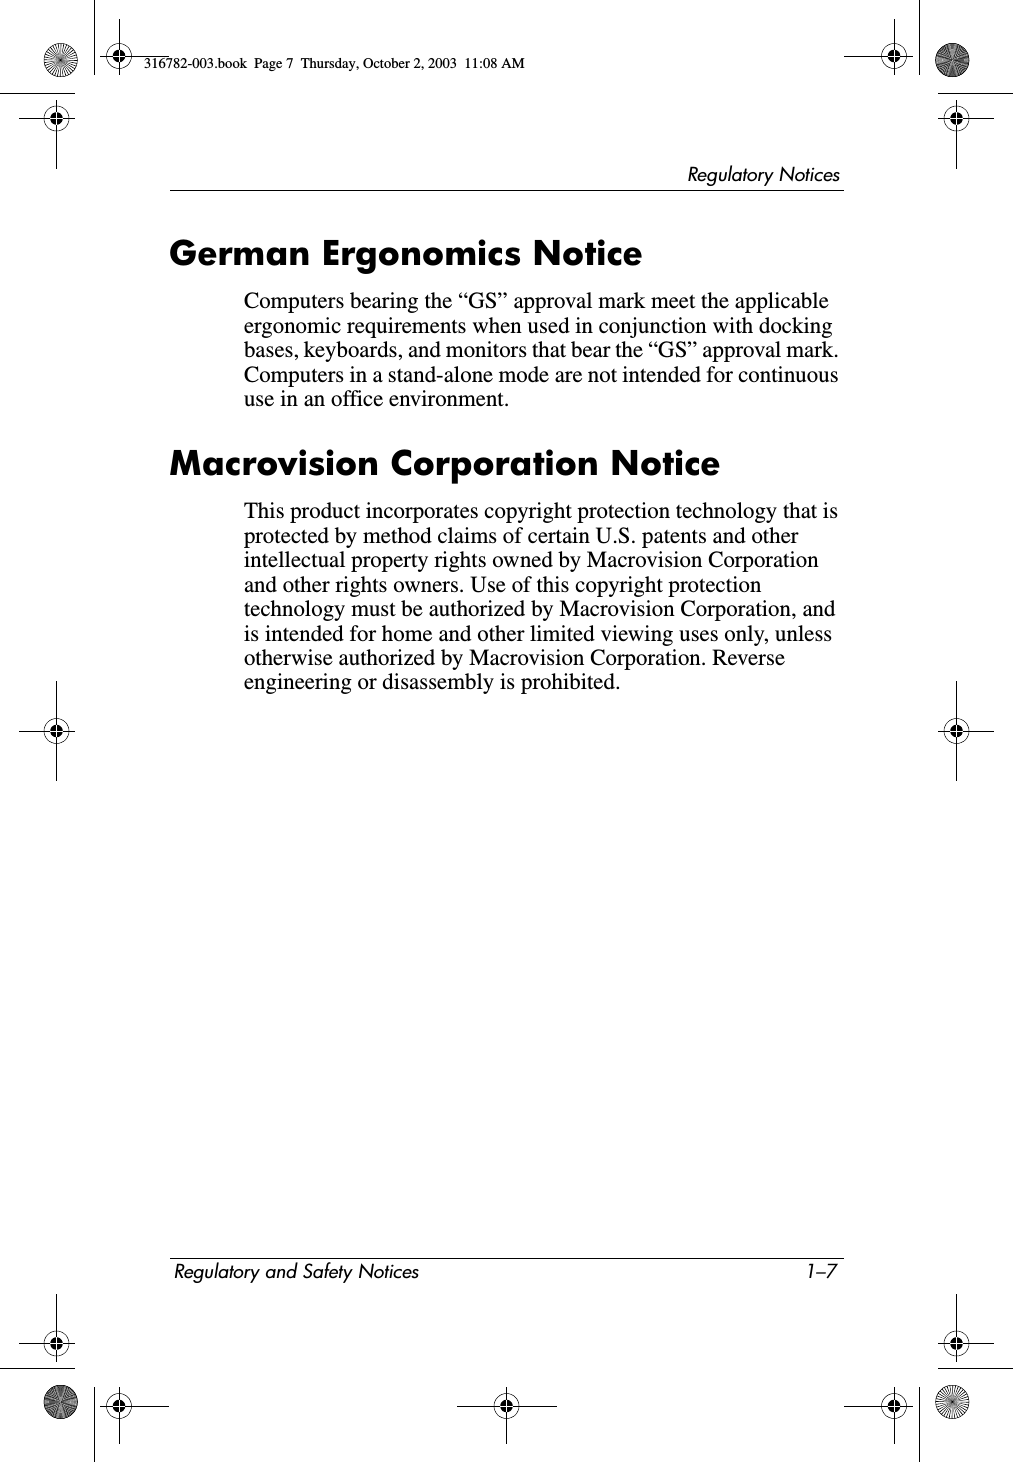 Regulatory NoticesRegulatory and Safety Notices 1–7German Ergonomics NoticeComputers bearing the “GS” approval mark meet the applicable ergonomic requirements when used in conjunction with docking bases, keyboards, and monitors that bear the “GS” approval mark. Computers in a stand-alone mode are not intended for continuous use in an office environment.Macrovision Corporation NoticeThis product incorporates copyright protection technology that is protected by method claims of certain U.S. patents and other intellectual property rights owned by Macrovision Corporation and other rights owners. Use of this copyright protection technology must be authorized by Macrovision Corporation, and is intended for home and other limited viewing uses only, unless otherwise authorized by Macrovision Corporation. Reverse engineering or disassembly is prohibited.316782-003.book  Page 7  Thursday, October 2, 2003  11:08 AM